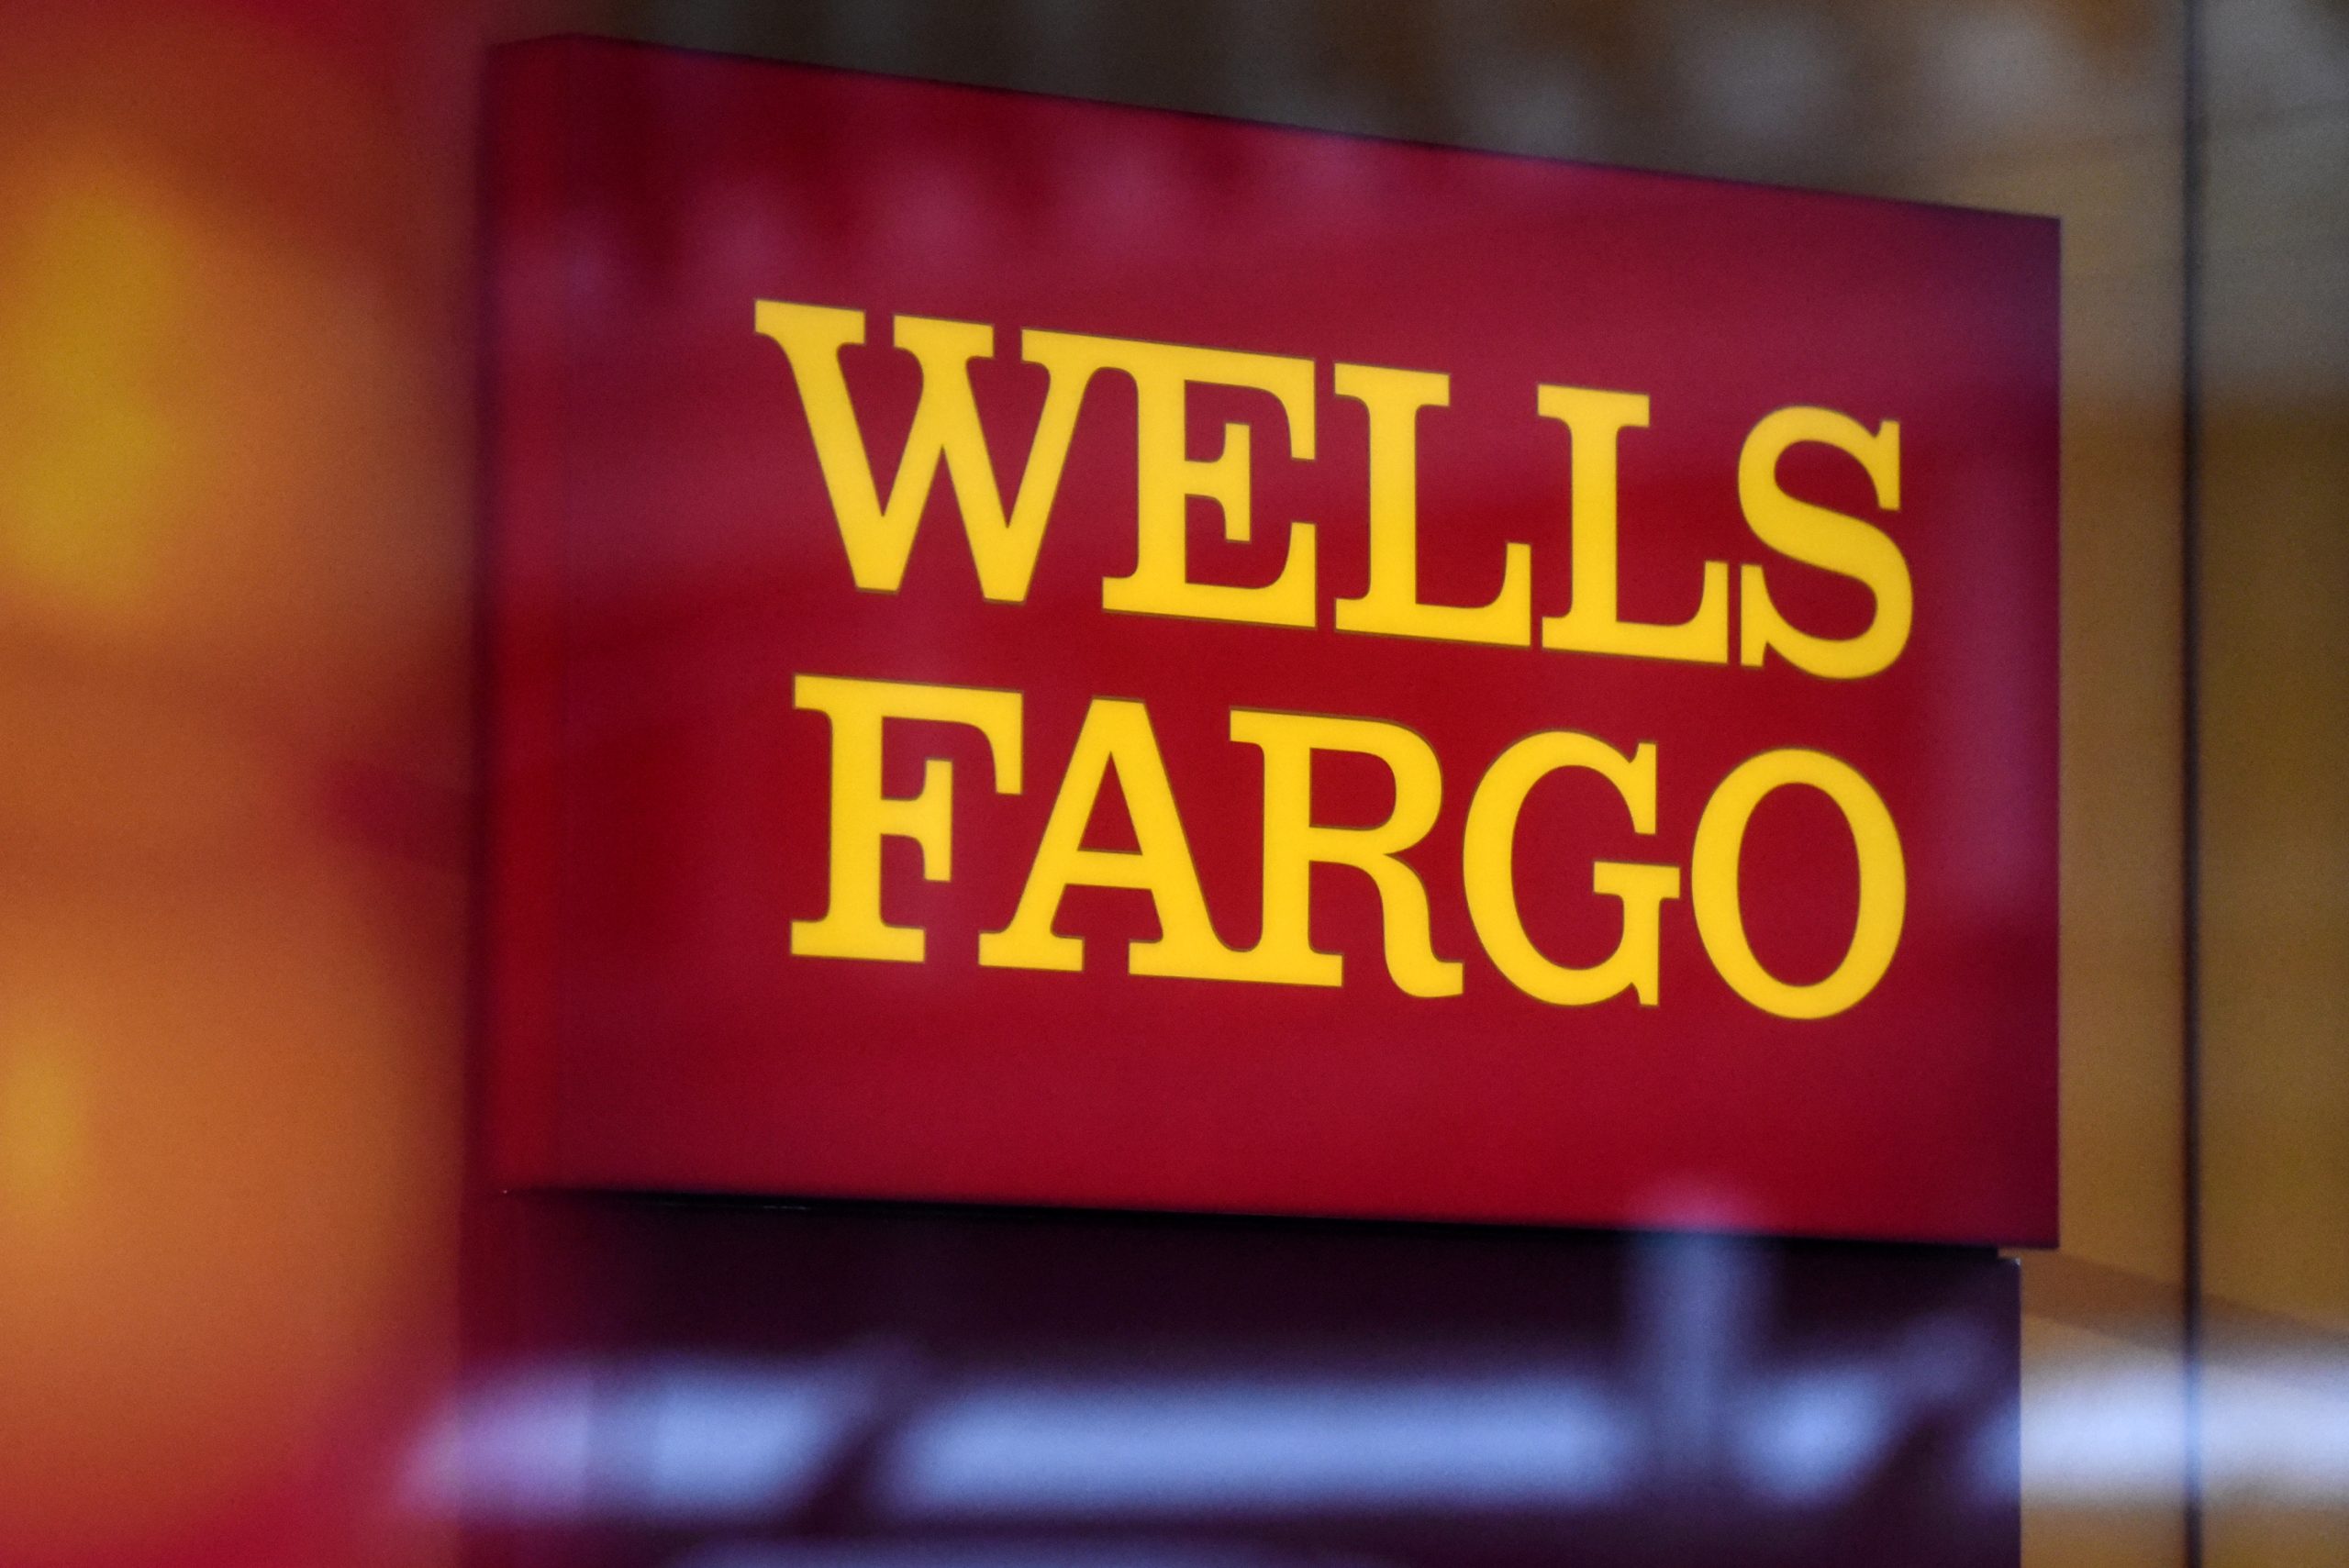 JUST IN: Wells Fargo, the Third Largest Bank in the US, Makes a Giant Bitcoin Push